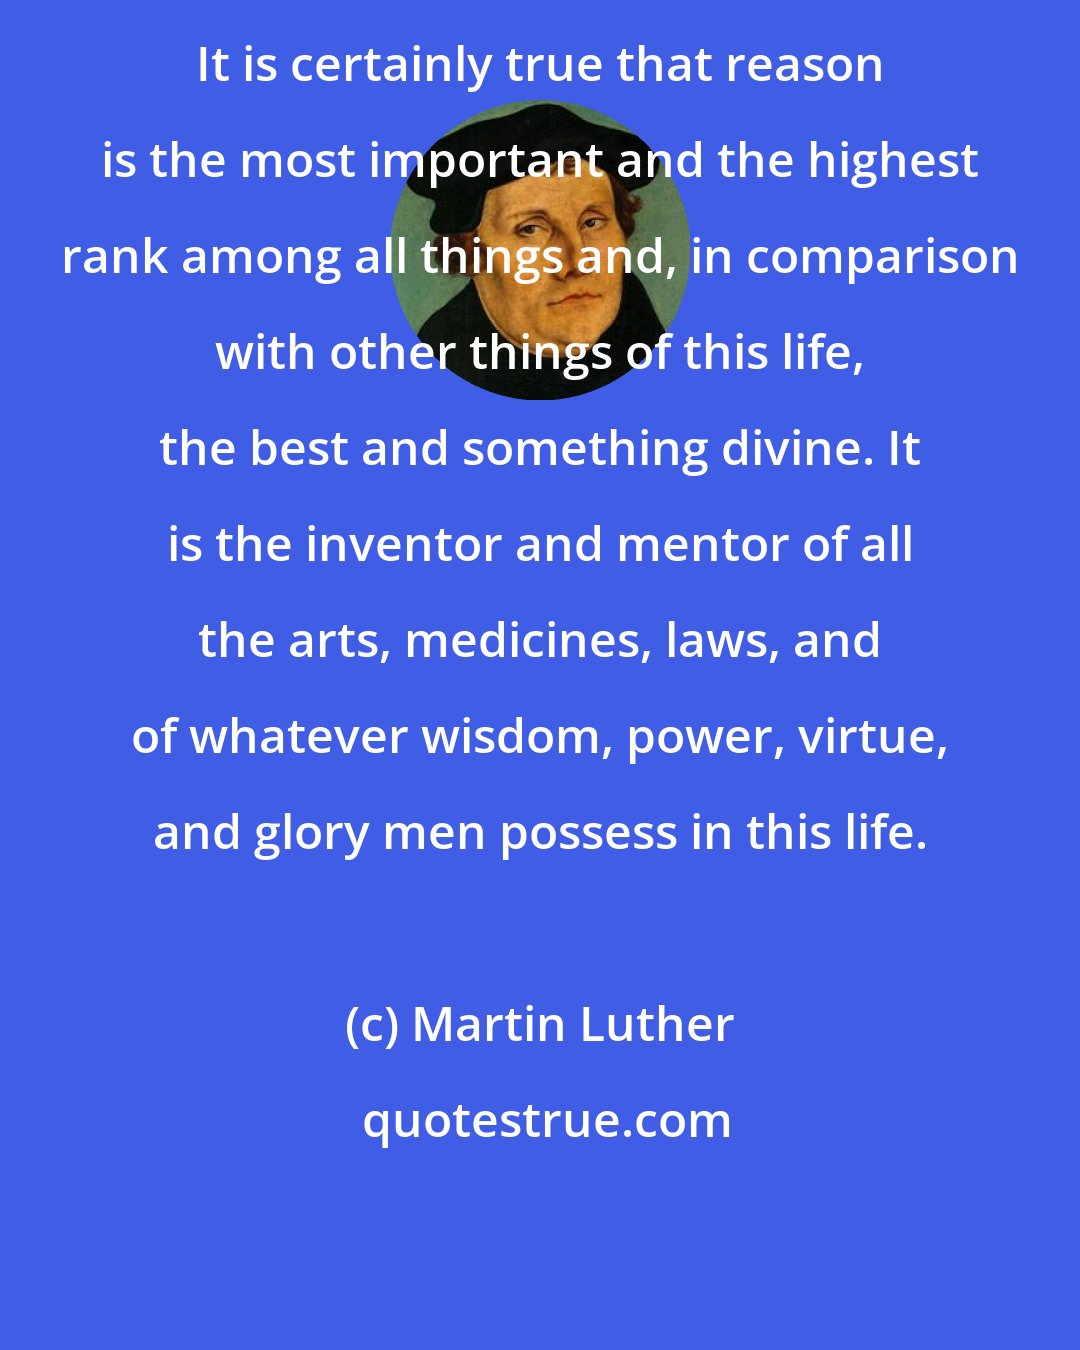 Martin Luther: It is certainly true that reason is the most important and the highest rank among all things and, in comparison with other things of this life, the best and something divine. It is the inventor and mentor of all the arts, medicines, laws, and of whatever wisdom, power, virtue, and glory men possess in this life.